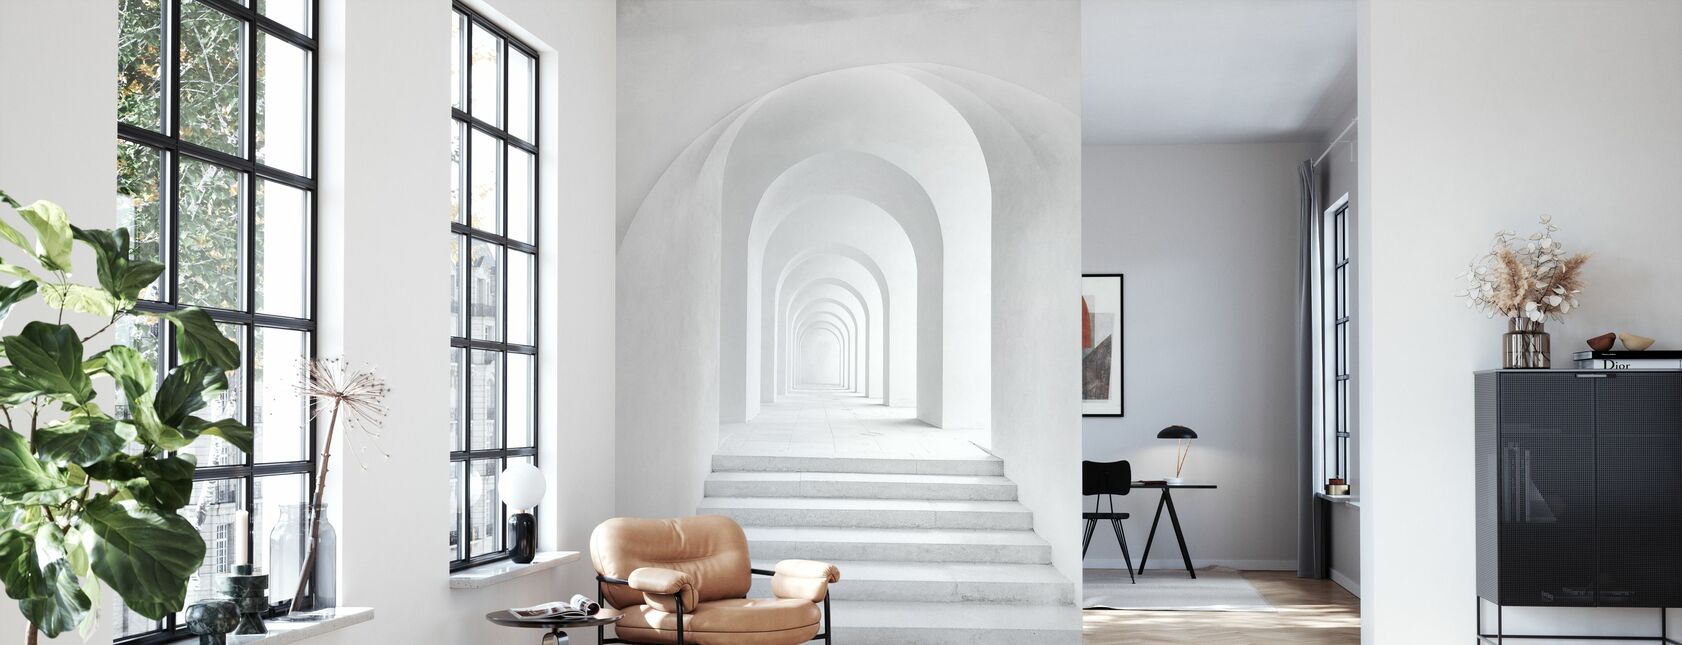 White Archway - Wallpaper - Living Room